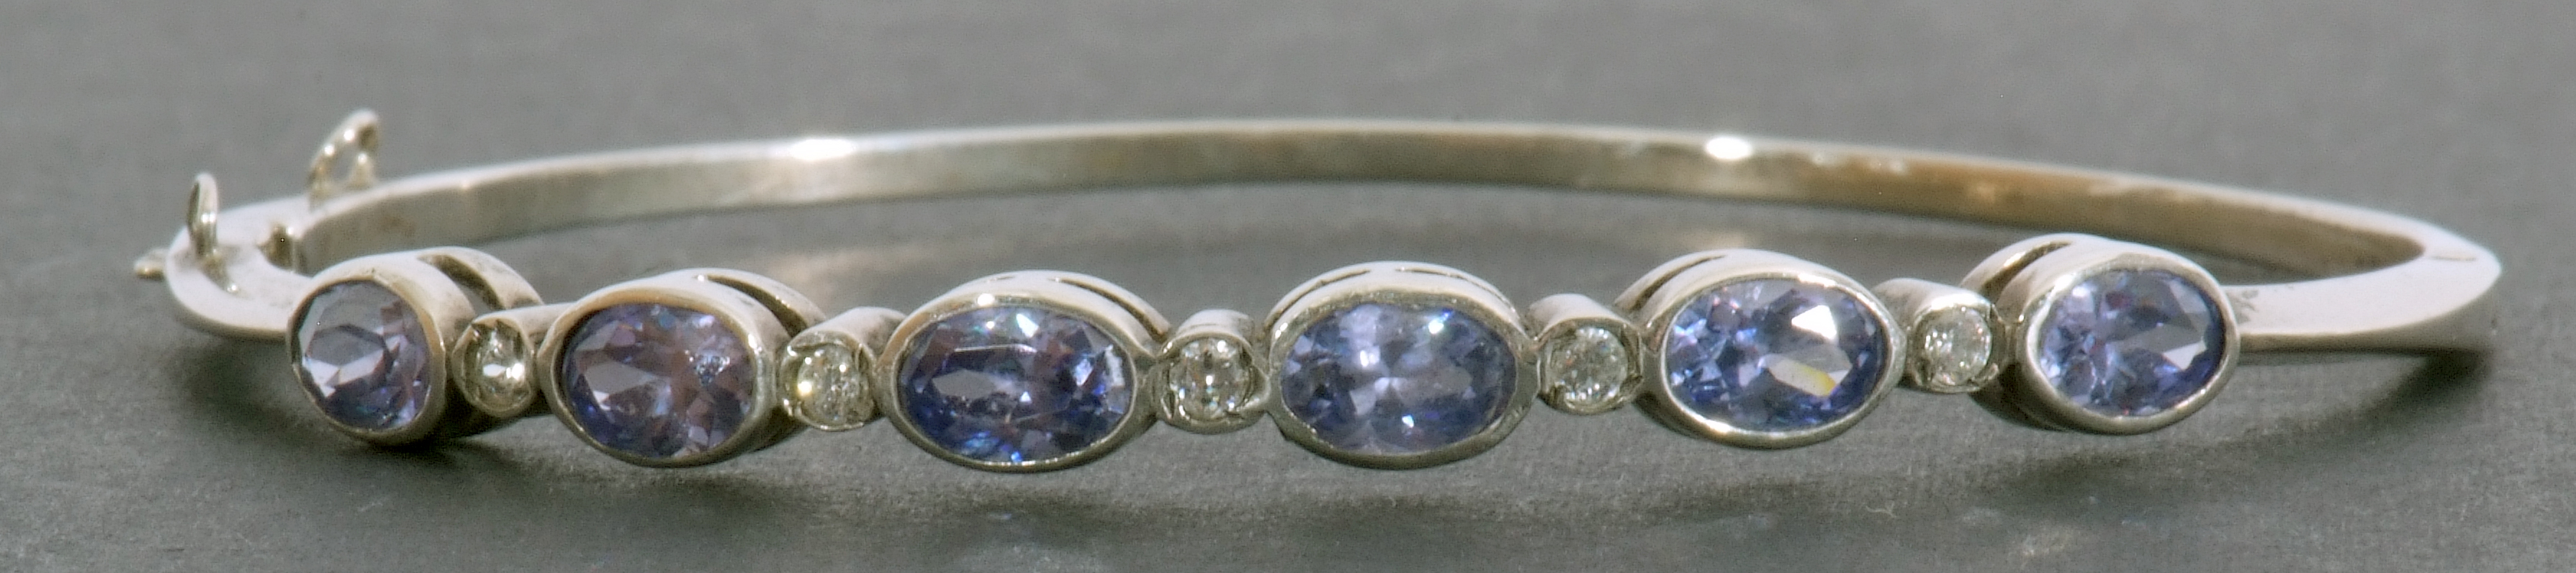 Modern pale sapphire and diamond set hinged bracelet, featuring six oval faceted pale sapphires in - Image 2 of 6